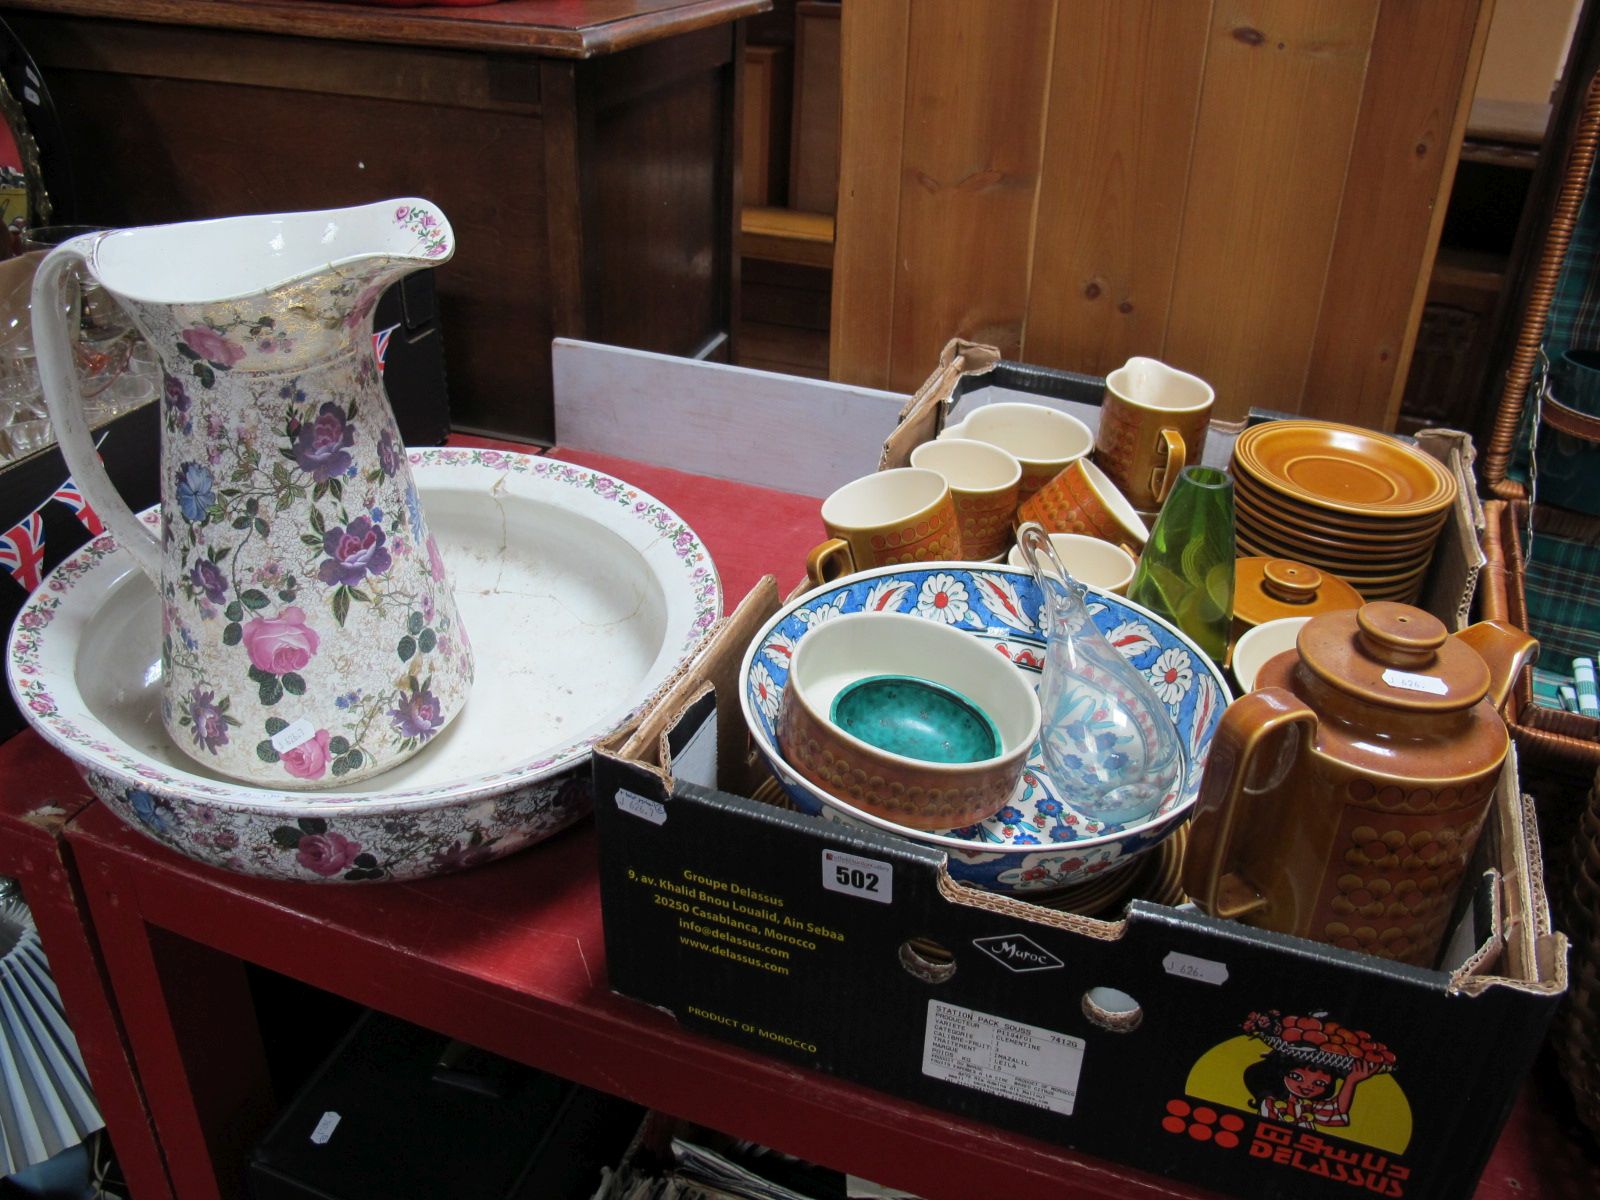 A Quantity of Hornsea 'Saffron' Tea and Dinner Wares, (approximately fifty pieces), a Holmgaard